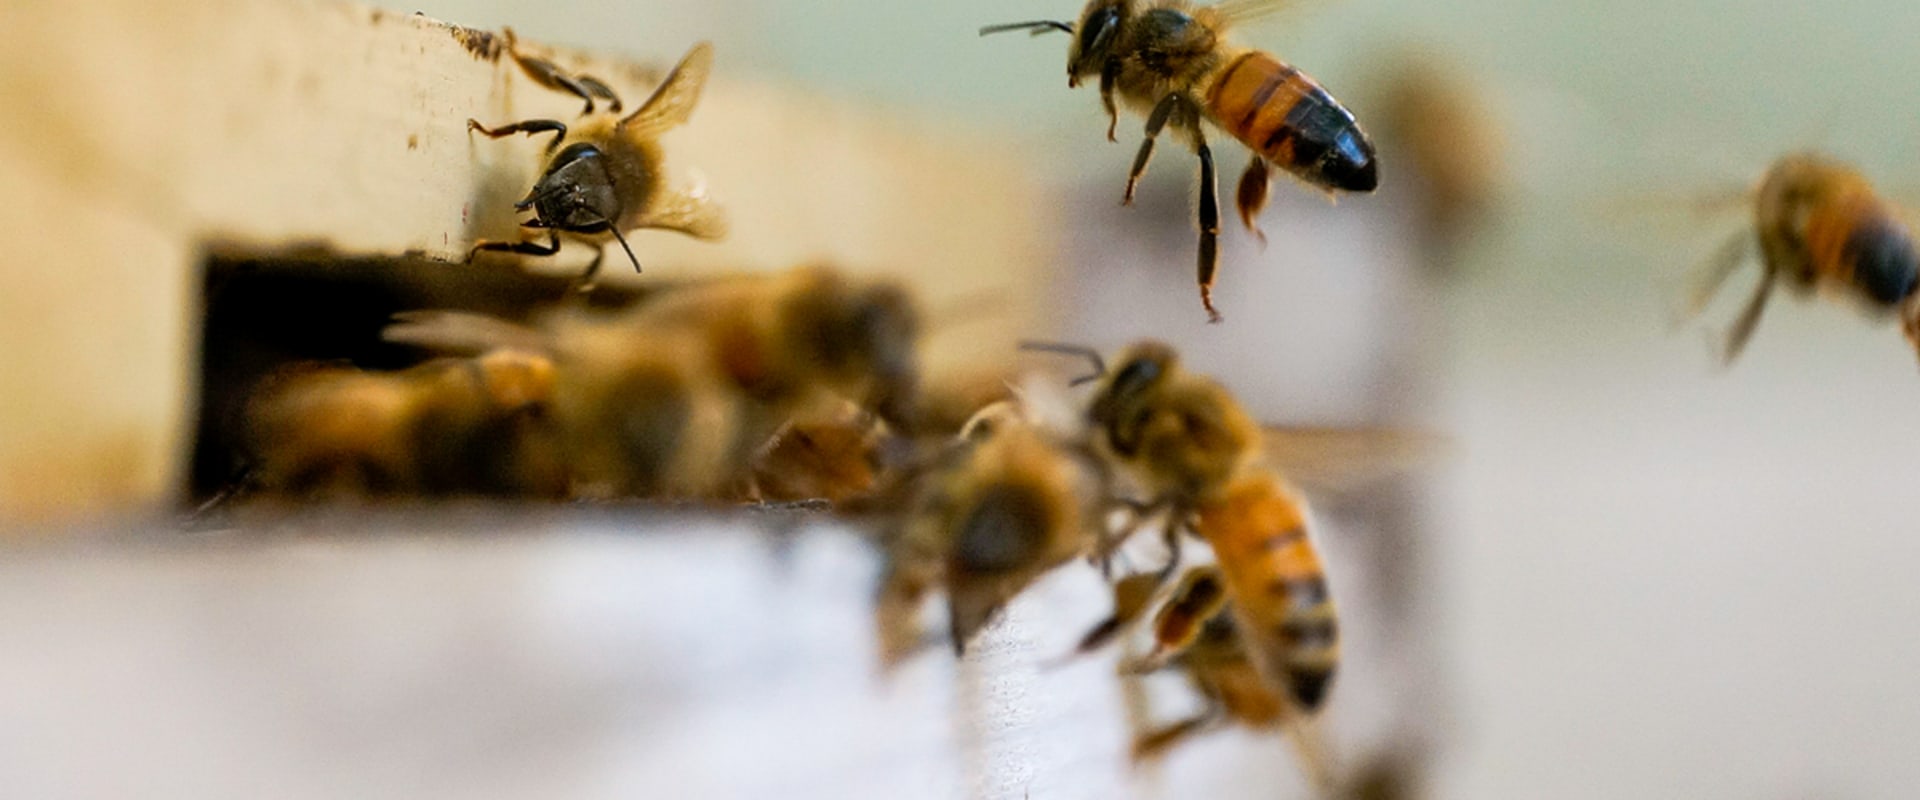 Behavior of Bees: An Overview